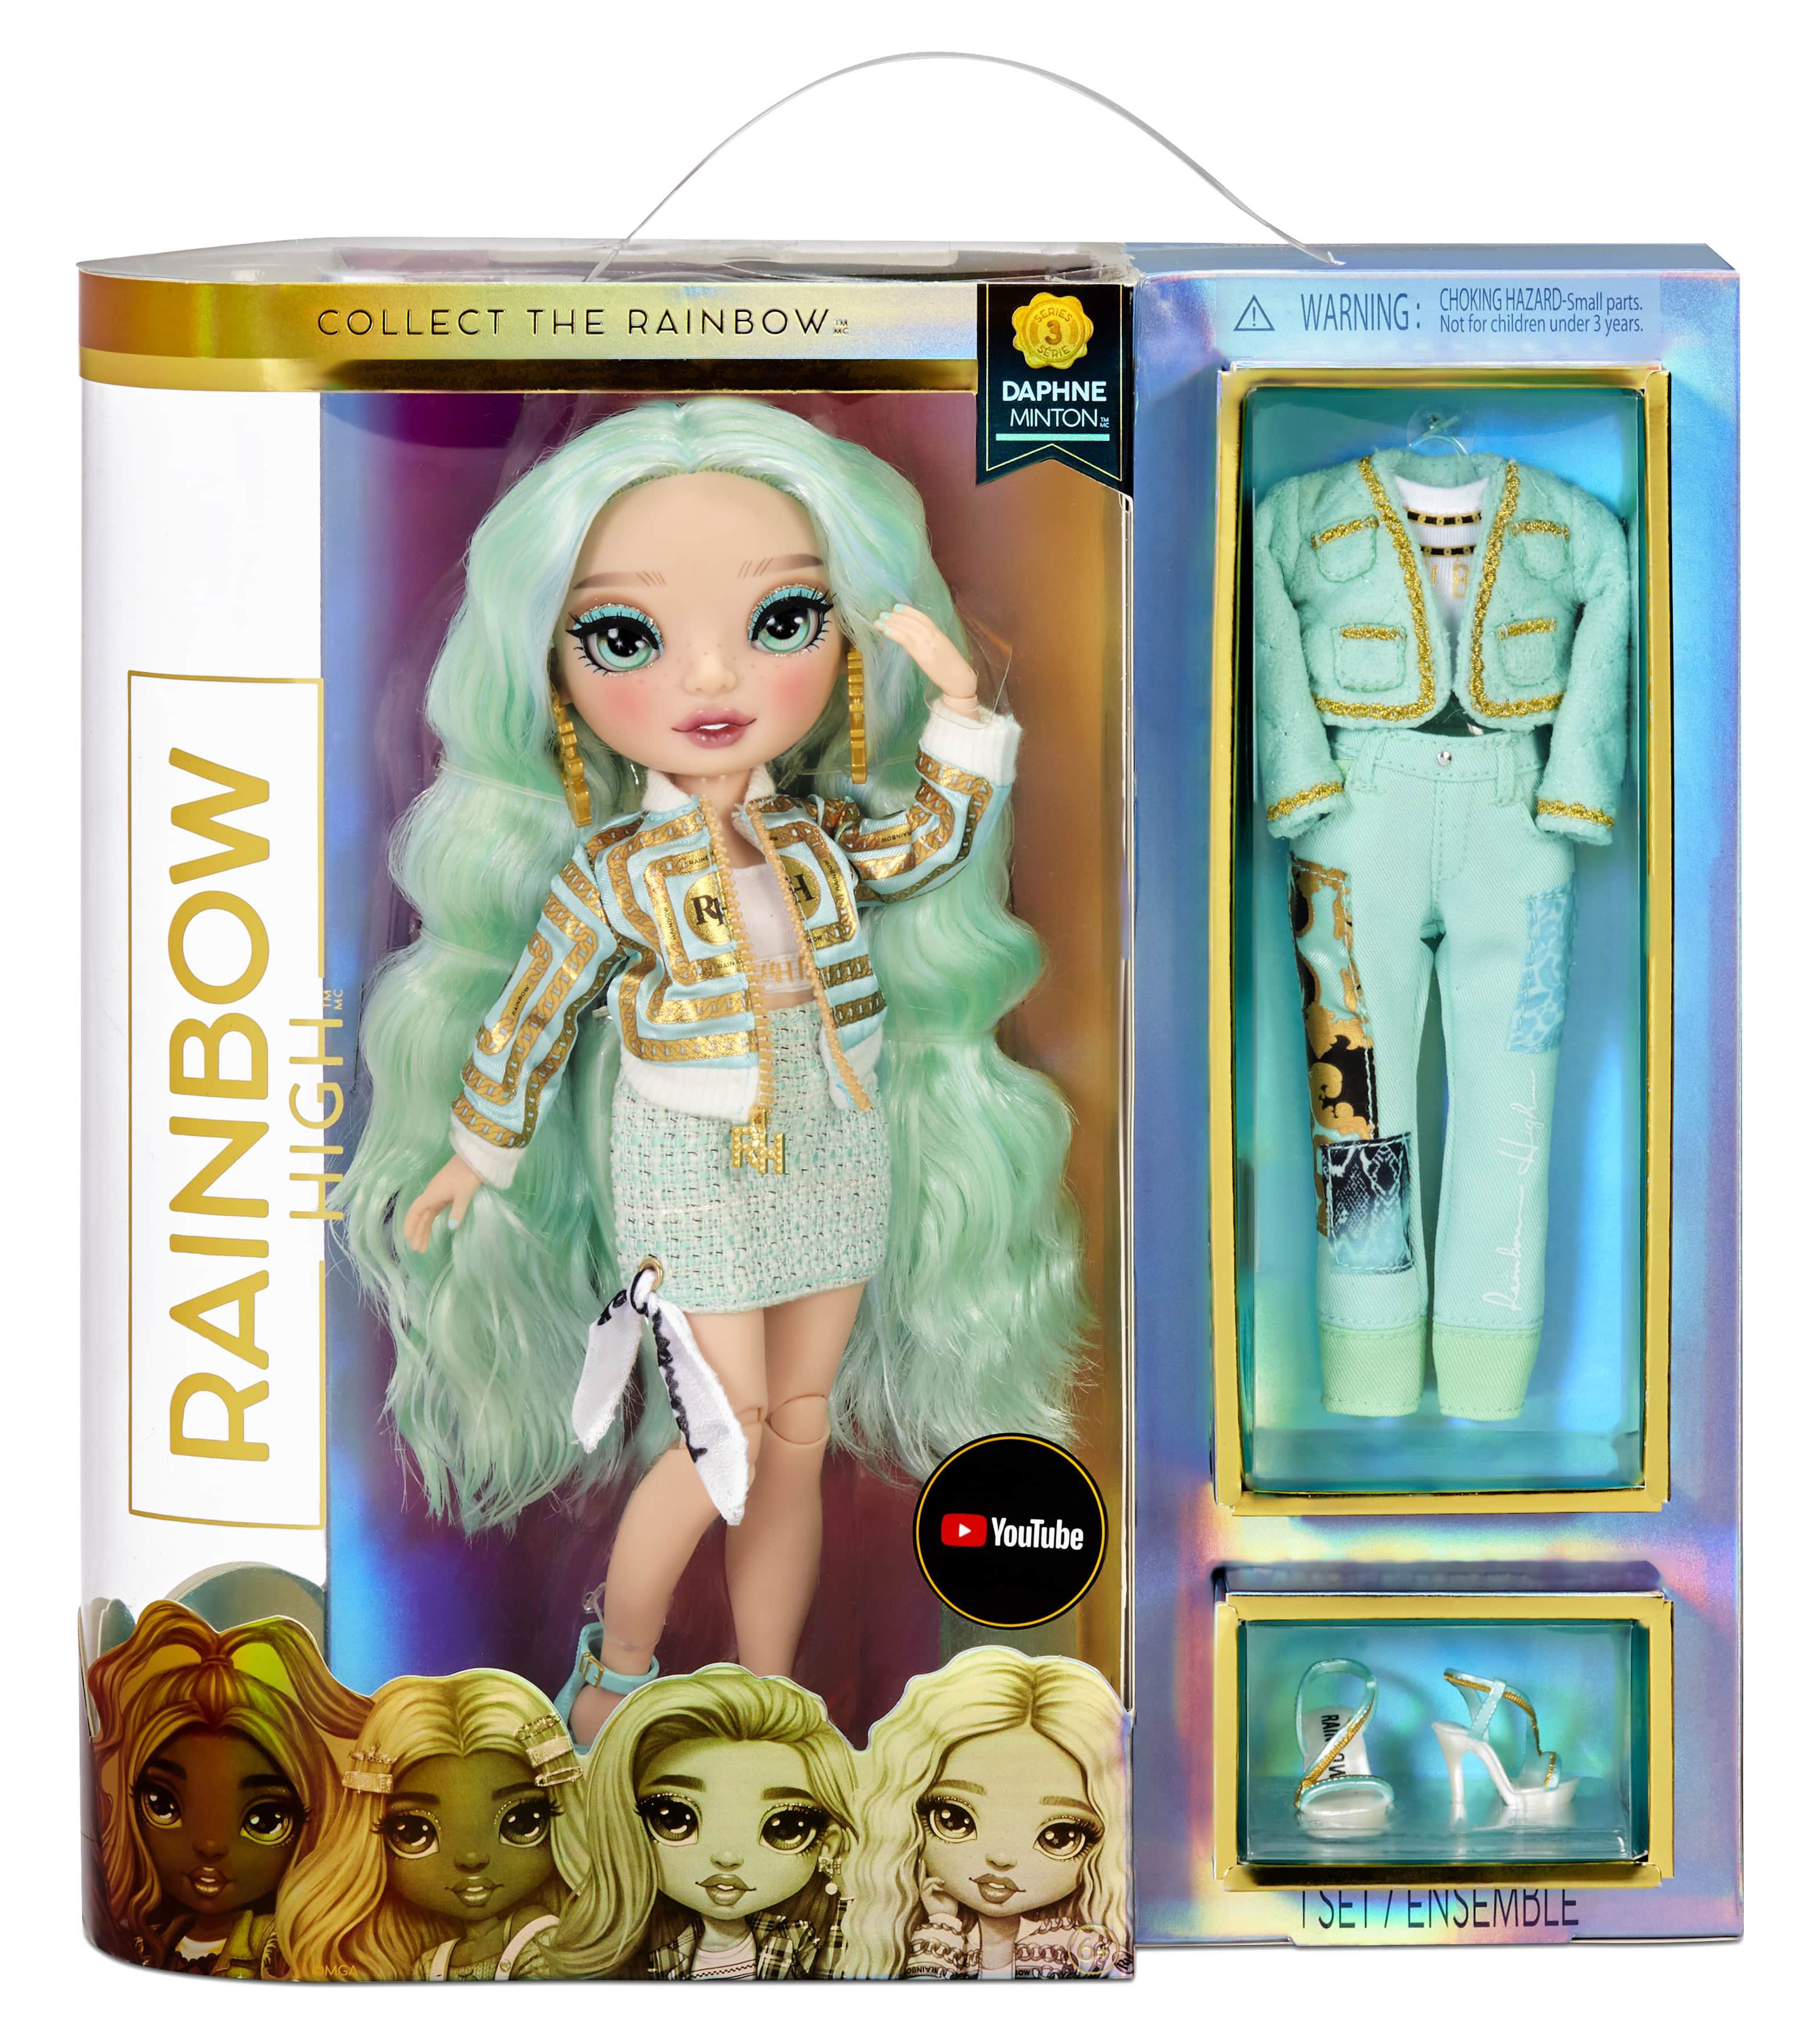 Rainbow High Daphne Minton – Mint (Light Green) Fashion Doll With 2 Outfits To Mix & Match And Doll Accessories, Great Gift And Toy for Kids 6-12 Years Old - image 2 of 8